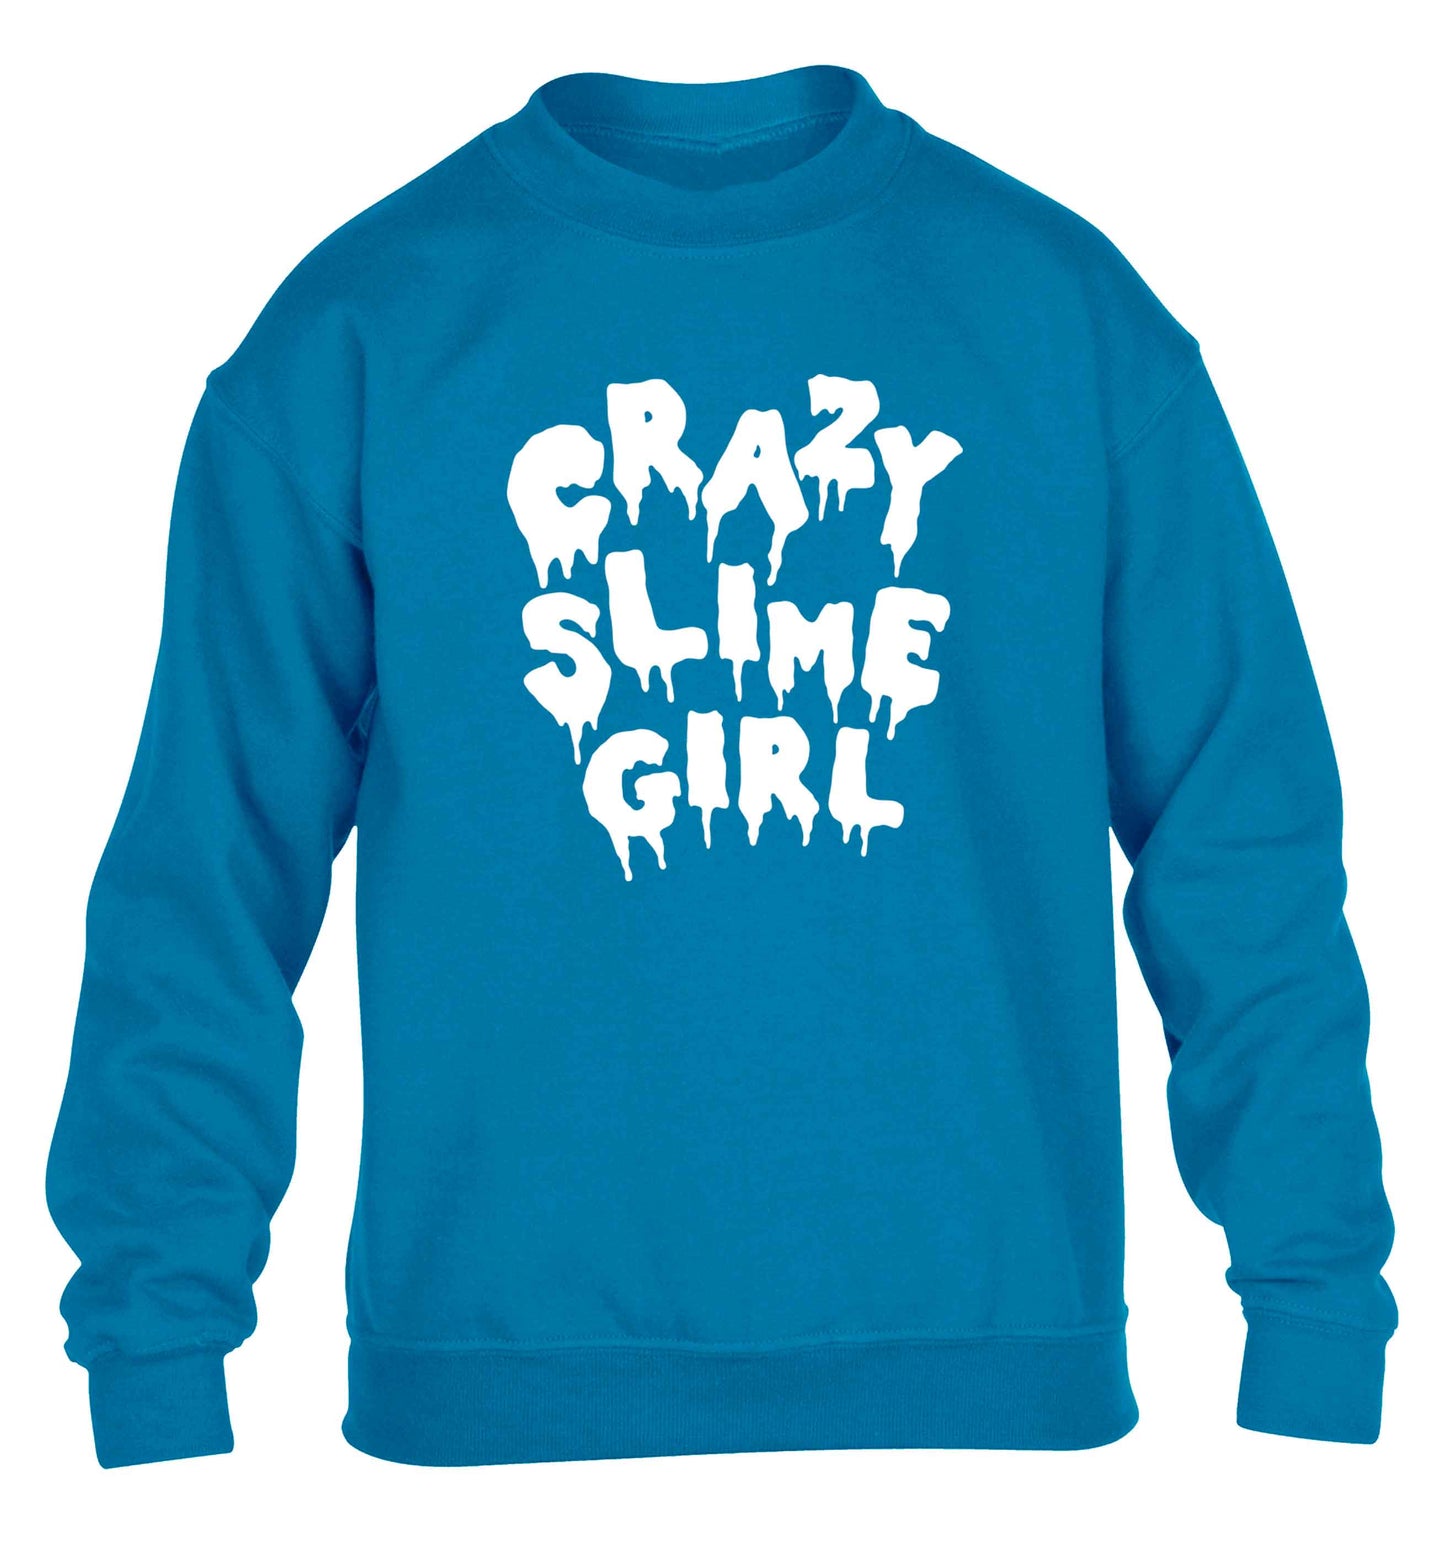 Crazy slime girl children's blue sweater 12-13 Years